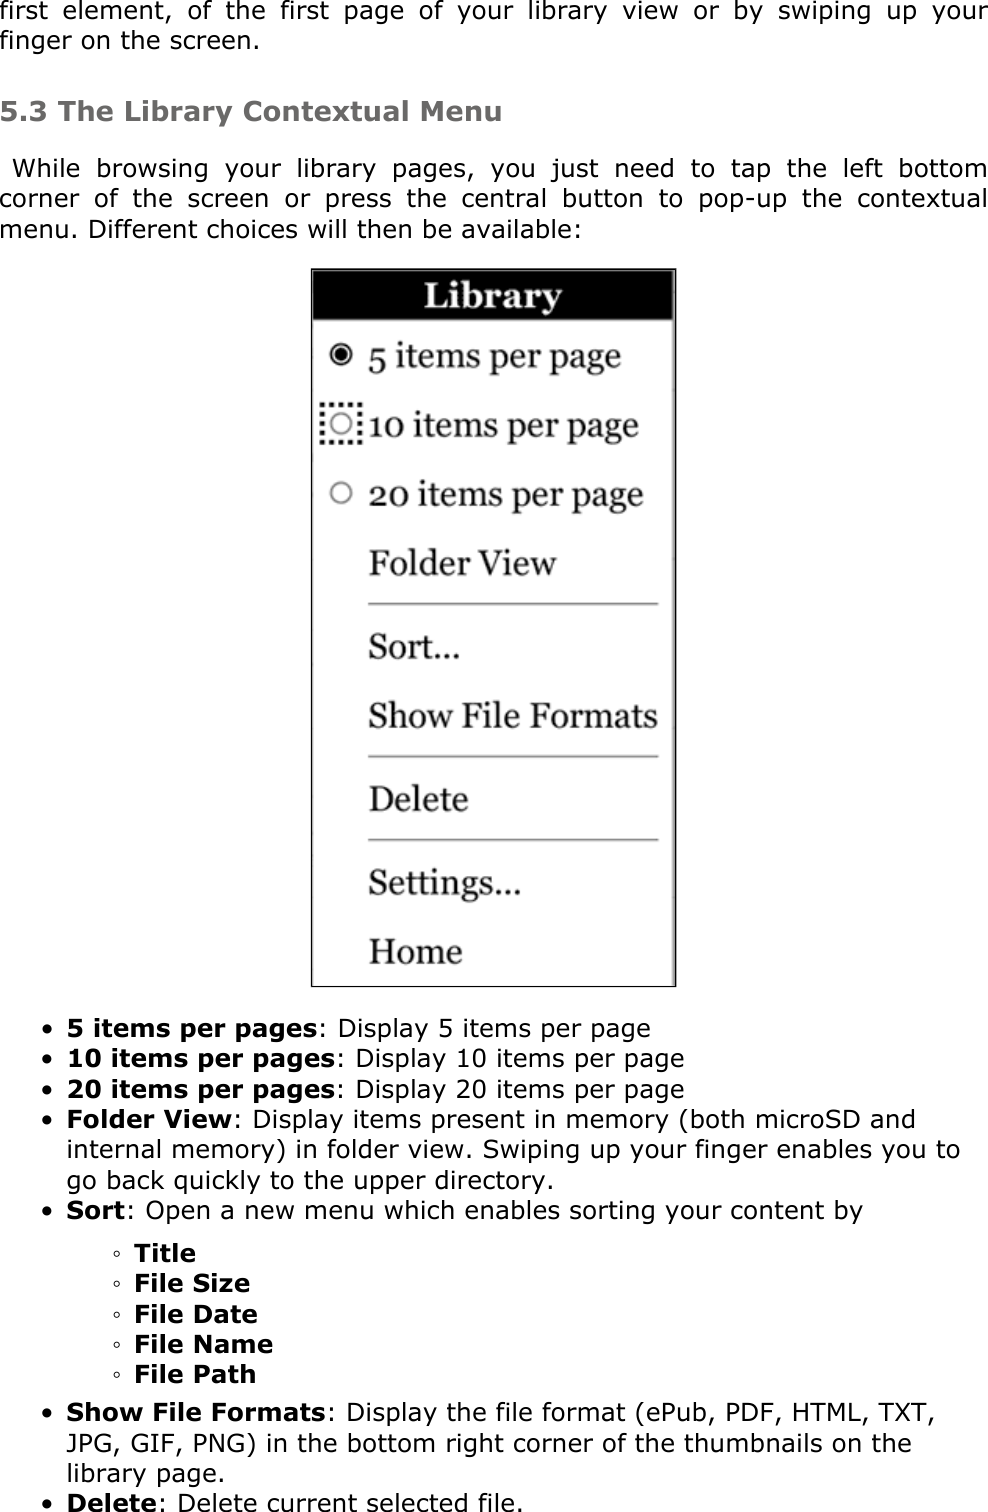 first  element,  of  the  first  page  of  your  library  view  or  by  swiping  up  your finger on the screen. 5.3 The Library Contextual MenuWhile  browsing  your  library  pages,  you  just  need  to  tap  the  left  bottom corner  of  the  screen  or  press  the  central  button  to  pop-up  the  contextual menu. Different choices will then be available: 5 items per pages: Display 5 items per page•10 items per pages: Display 10 items per page•20 items per pages: Display 20 items per page•Folder View: Display items present in memory (both microSD and internal memory) in folder view. Swiping up your finger enables you to go back quickly to the upper directory.•Sort: Open a new menu which enables sorting your content by •Title◦File Size◦File Date◦File Name◦File Path◦Show File Formats: Display the file format (ePub, PDF, HTML, TXT, JPG, GIF, PNG) in the bottom right corner of the thumbnails on the library page.•Delete: Delete current selected file.•